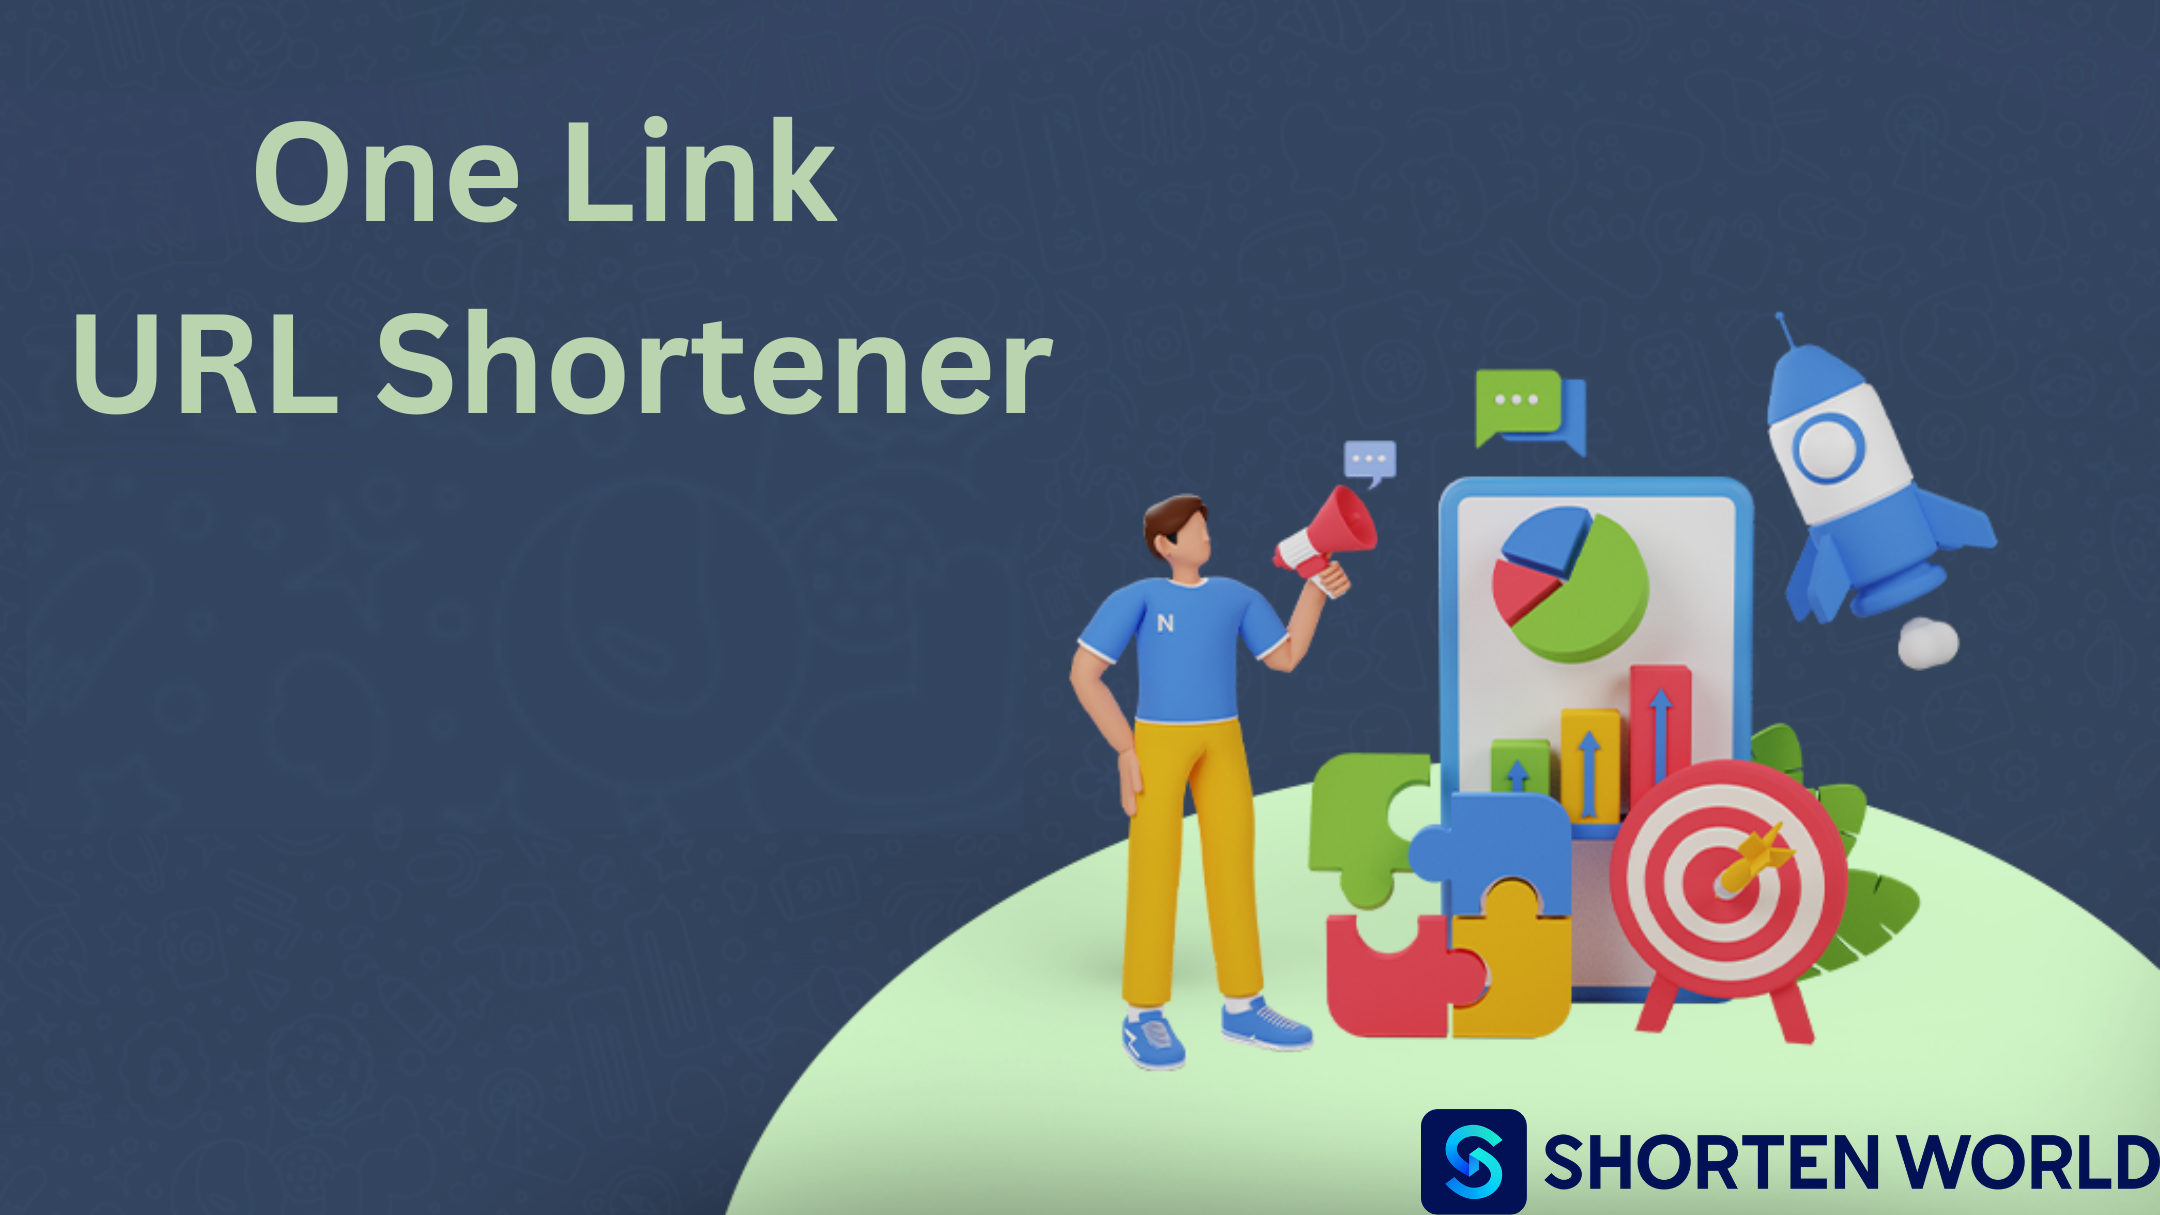 One Link: Optimizing Your Online Presence By A Single Link